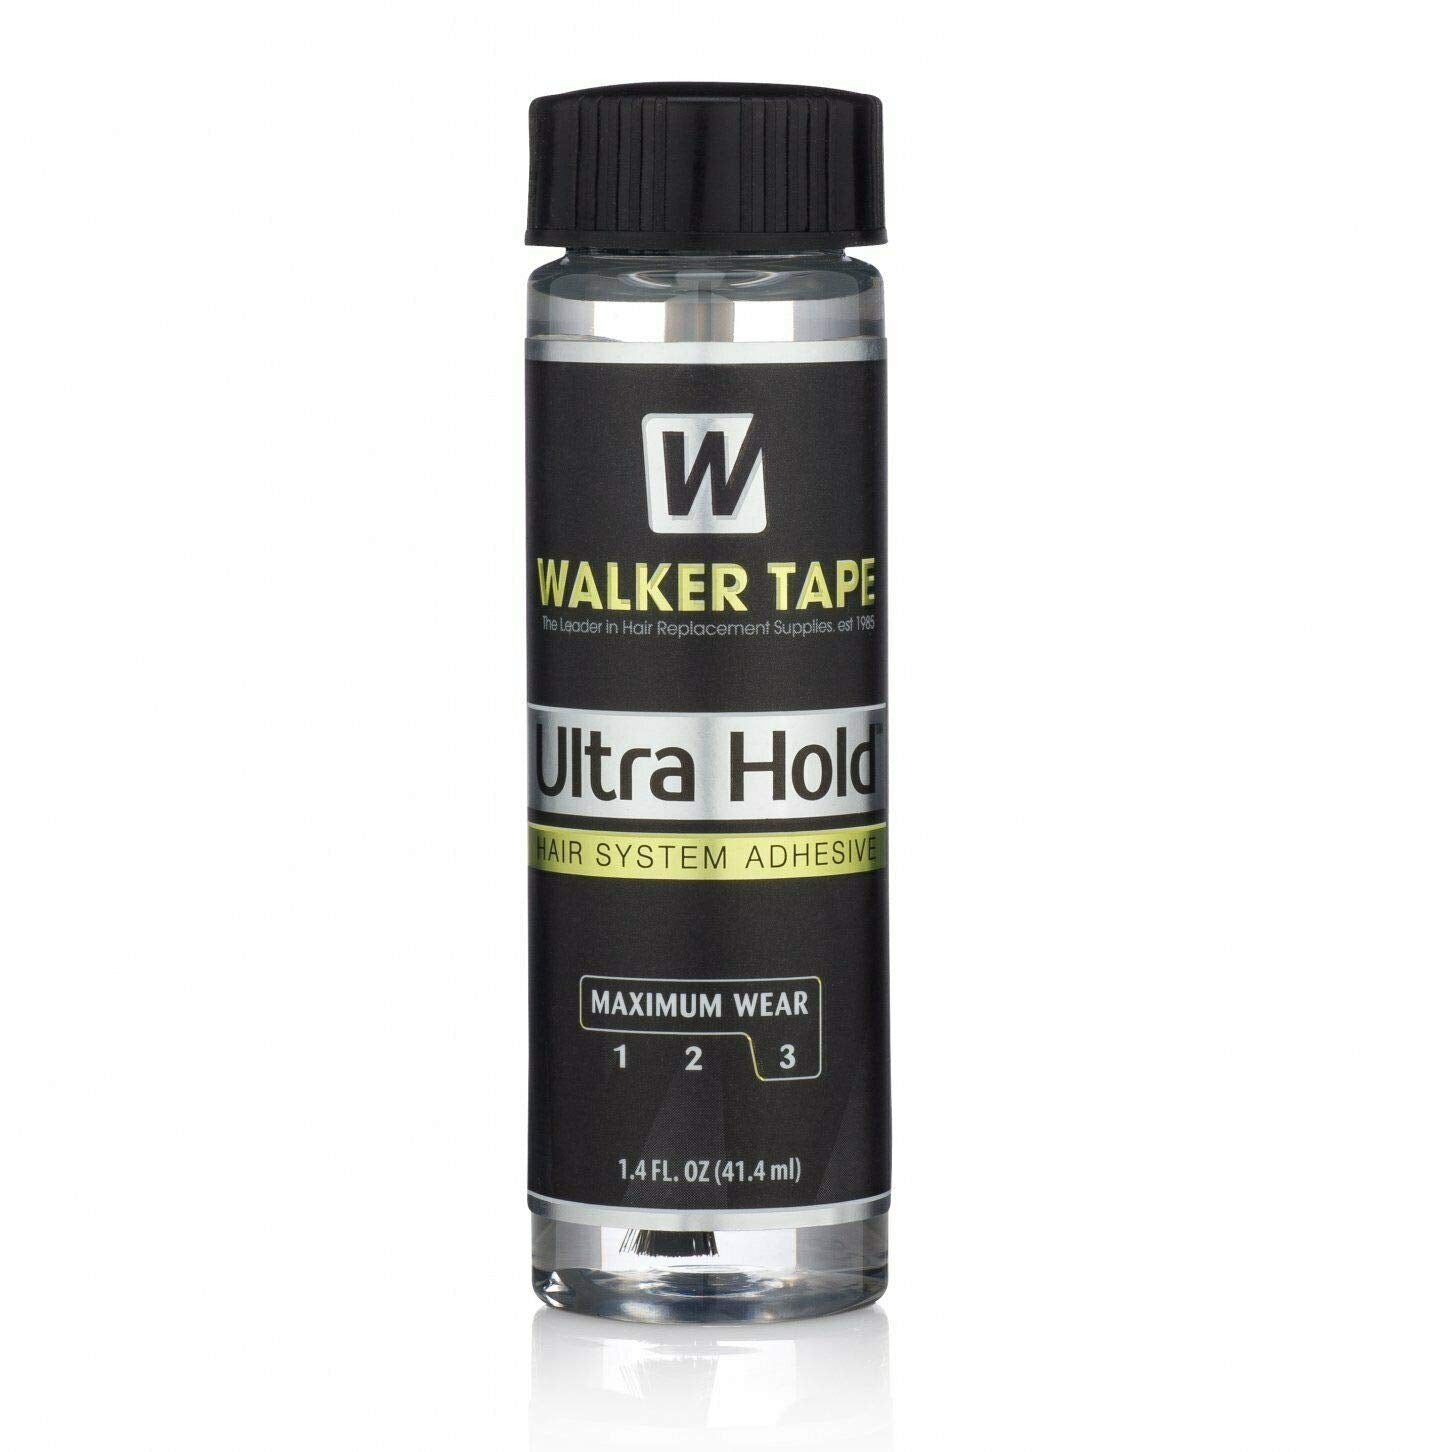 WALKER TAPE ULTRA HOLD ADHESIVE